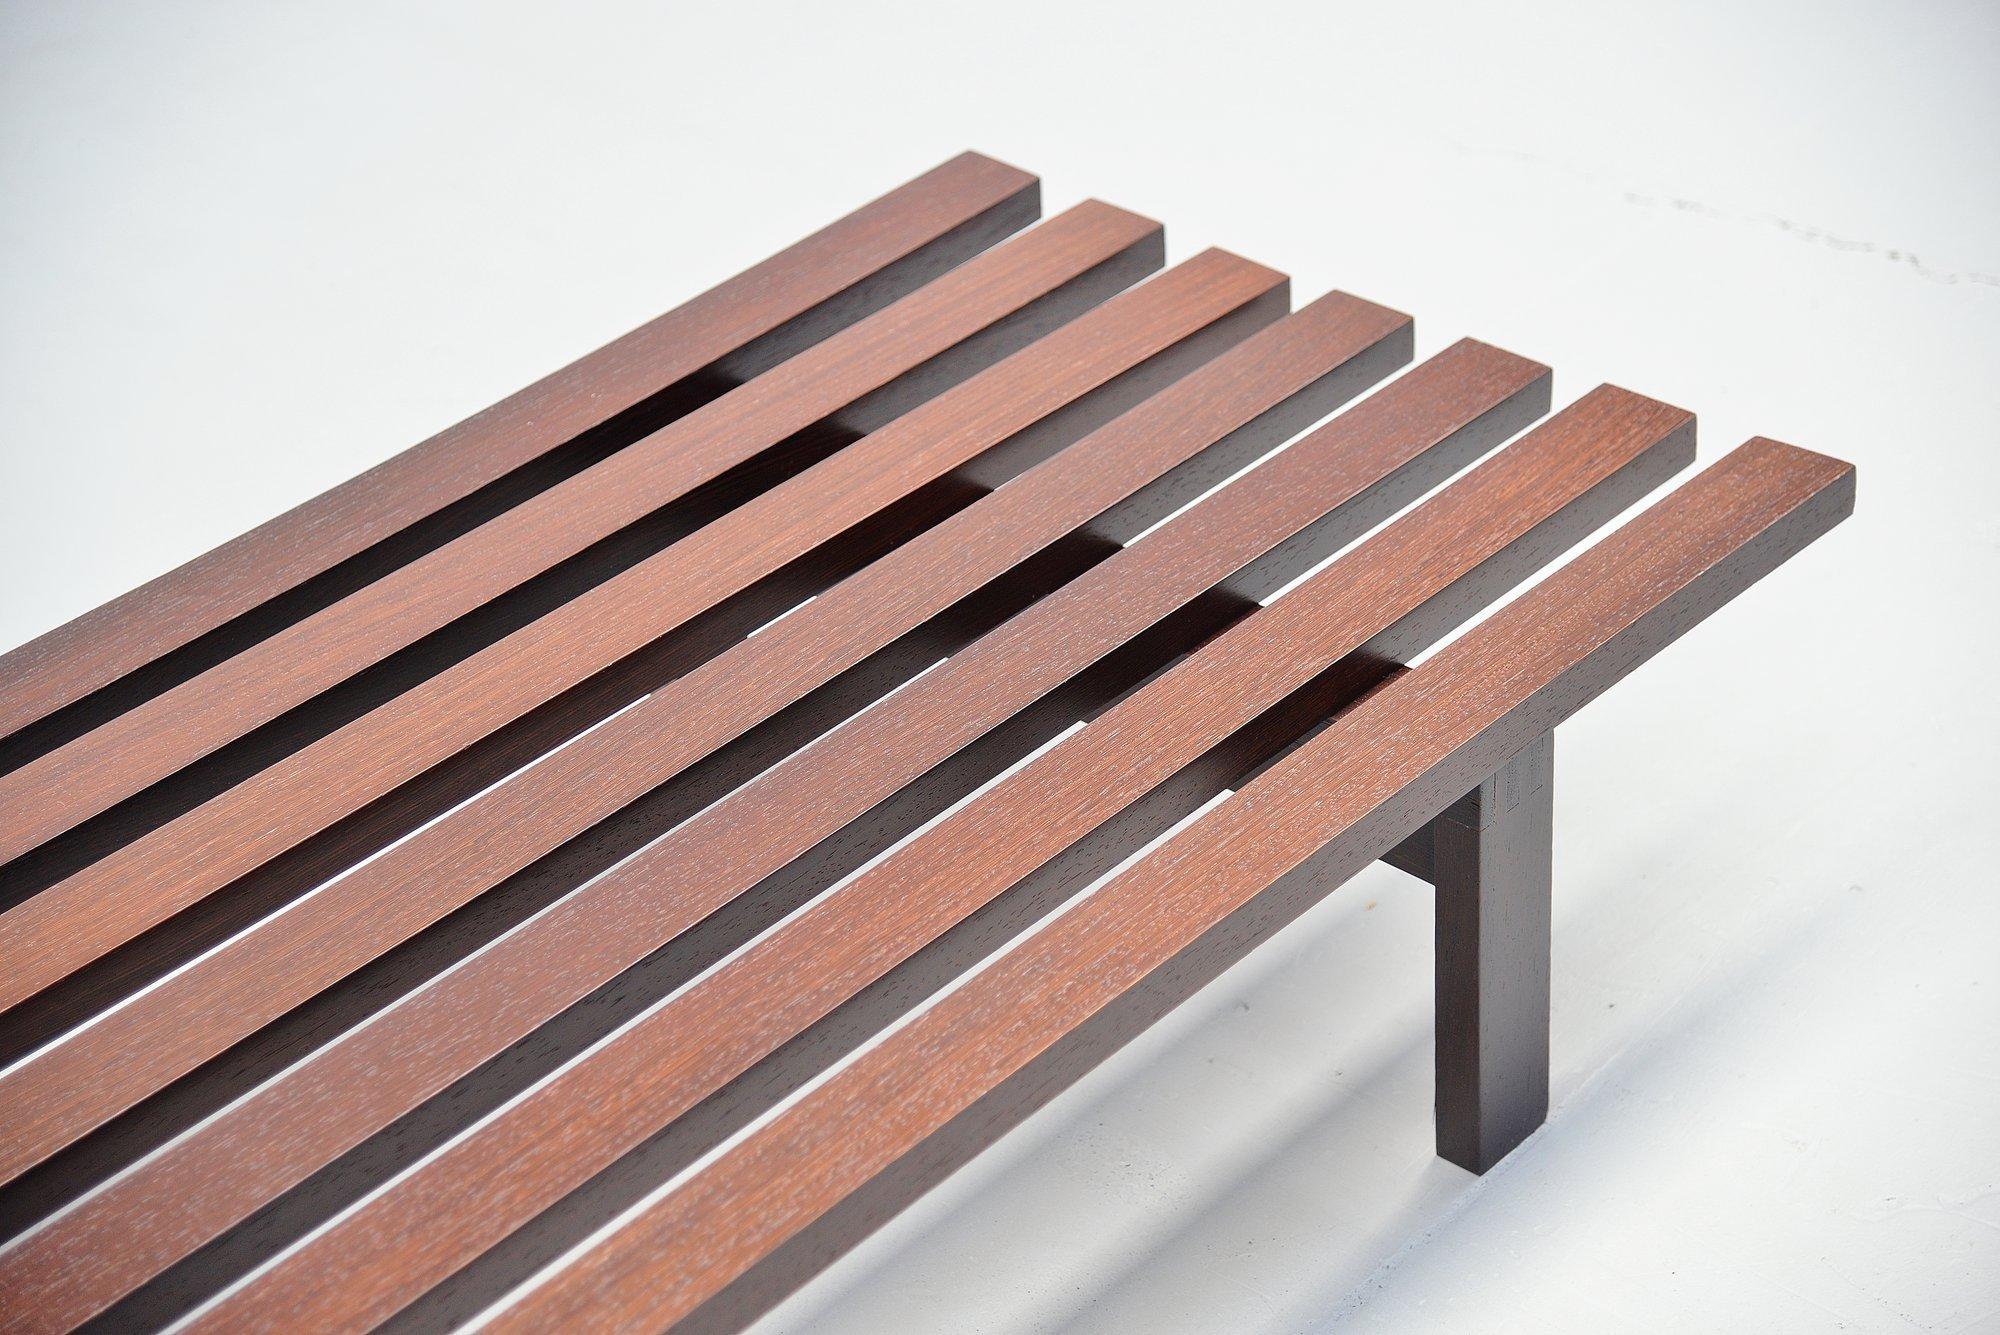 Nice large slat bench model BZ82 designed by Martin Visser, manufactured by 't Spectrum Bergeijk, Holland, 1965. This slat bench is made of solid wenge slats and is very strong. Its was originally designed for Stedelijk Museum where it was uses as